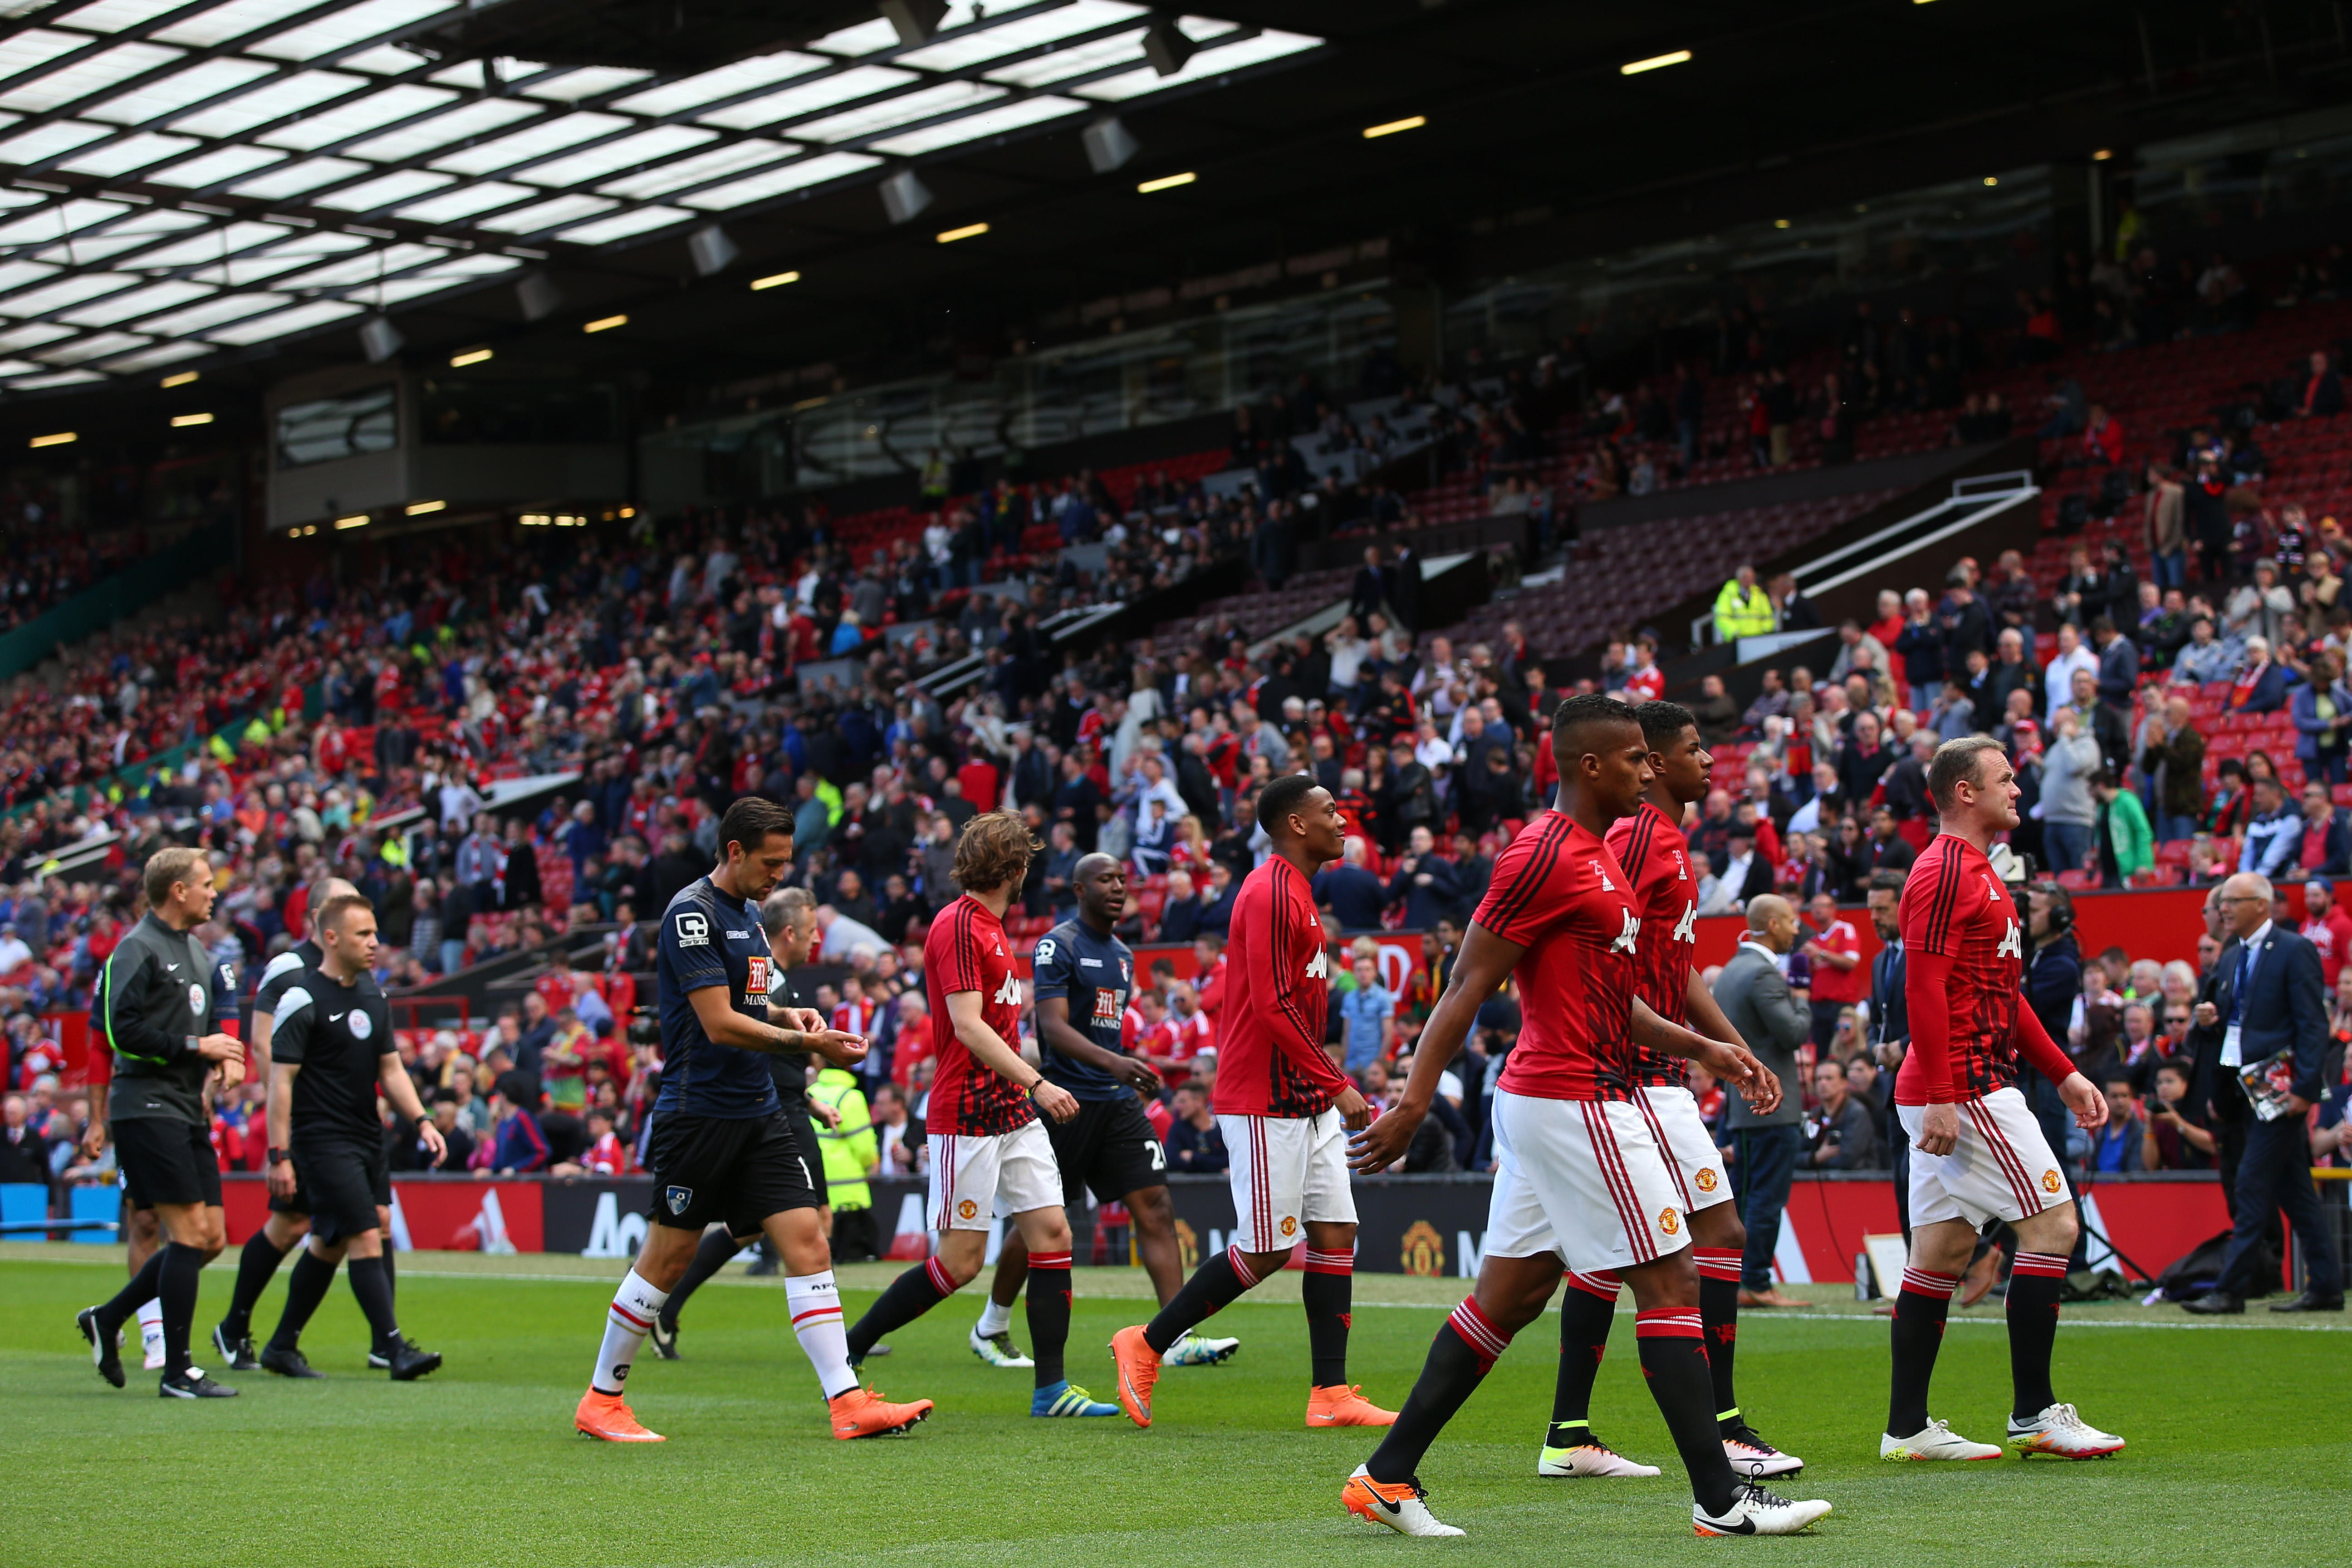 Players leave the field before the match was abandoned prior to the Barclays Premier League match between Manchester United and AFC Bournemouth at Old Trafford on May 15, 2016 in Manchester, England. (Getty)